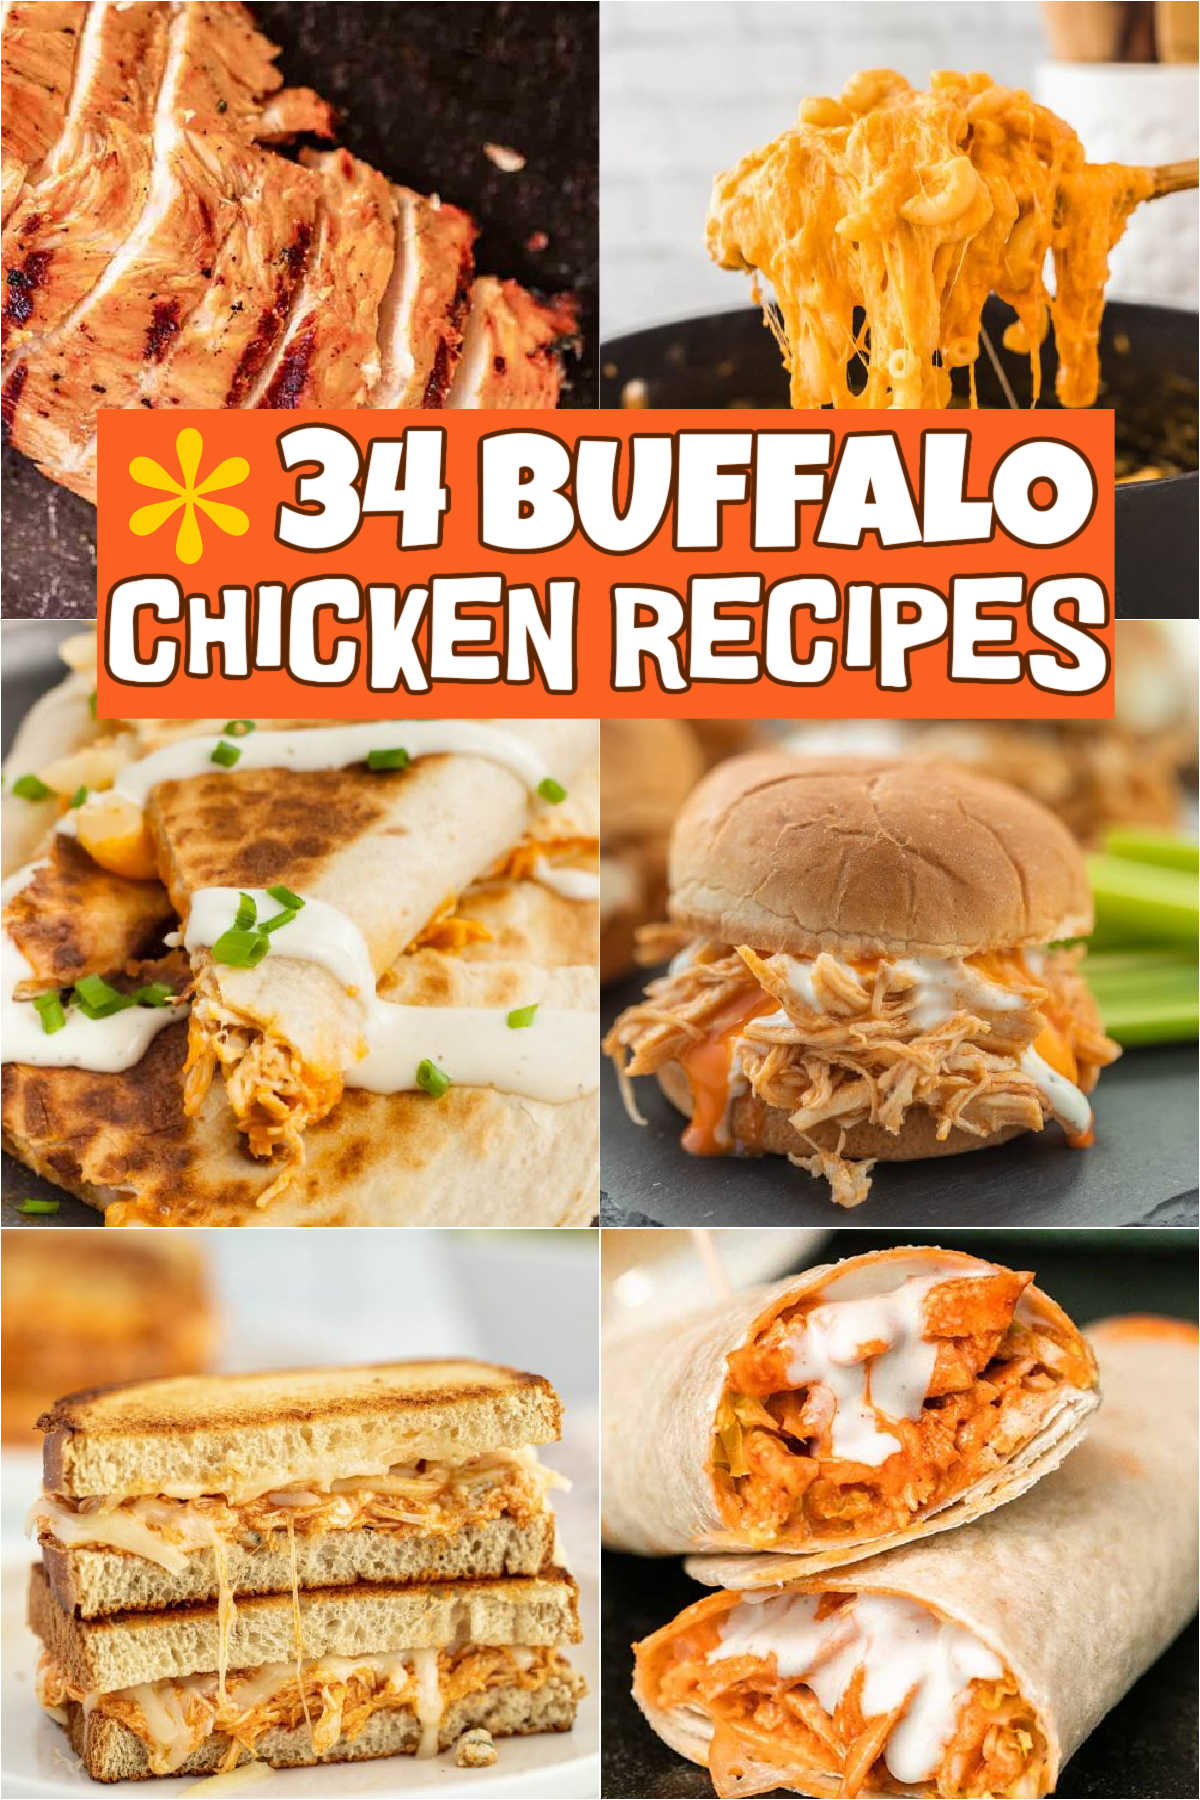 We love making Buffalo Chicken Recipes for an easy weeknight meal. Choose from dips, wraps, & sandwiches for the best buffalo chicken recipes. These 34 buffalo chicken recipes can be made with leftover chicken or rotisserie chicken. My kids even like to use buffalo sauce as a dipping sauce. #eatingonadime #buffalochickenrecipes #buffalochicken